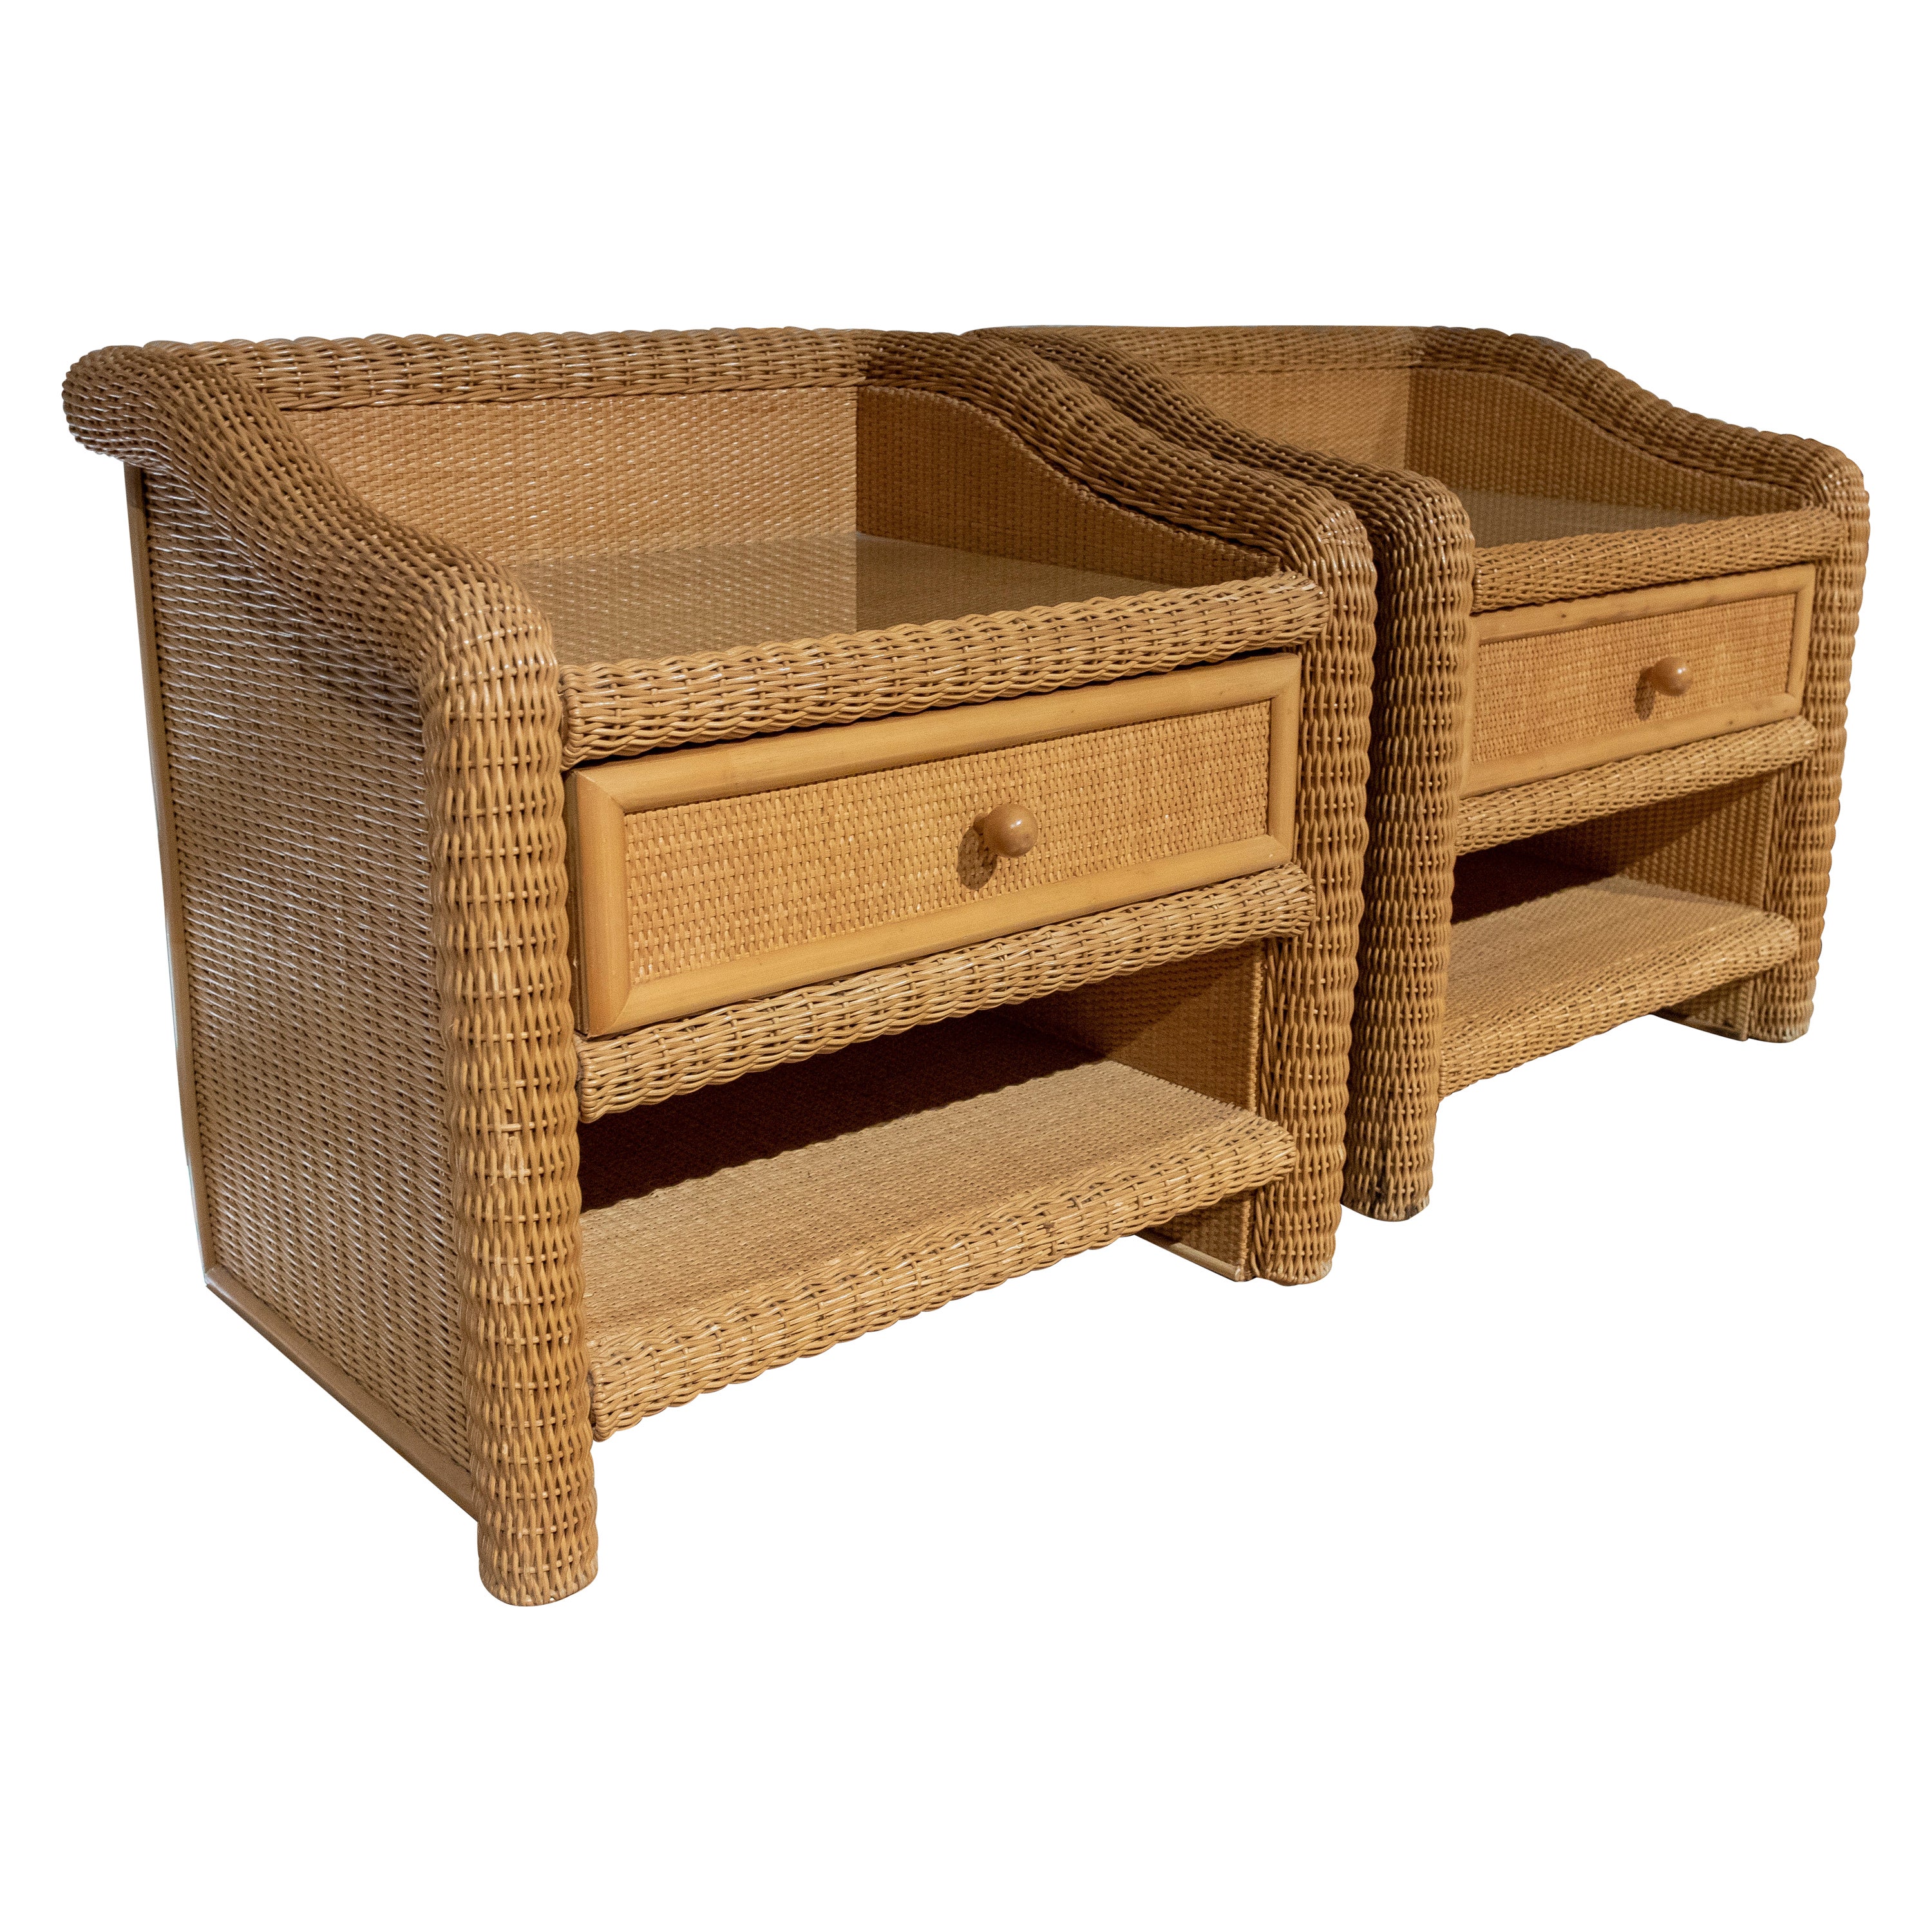 1980s Spanish Pair of Wicker Bedside Tables with Drawer